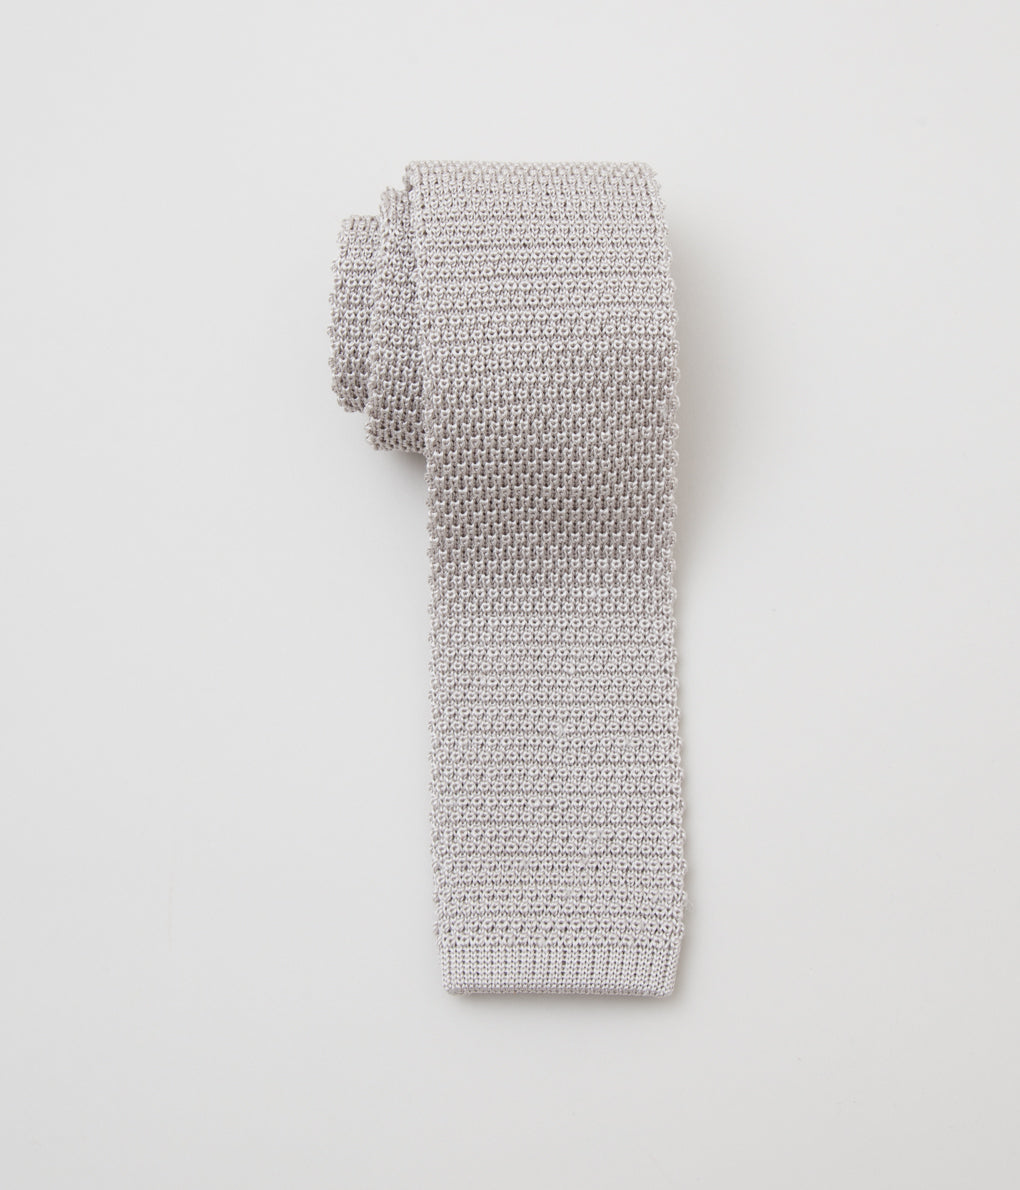 INDIVIDUALIZED ACCESSORIES "KNIT TIE" (SILVER)